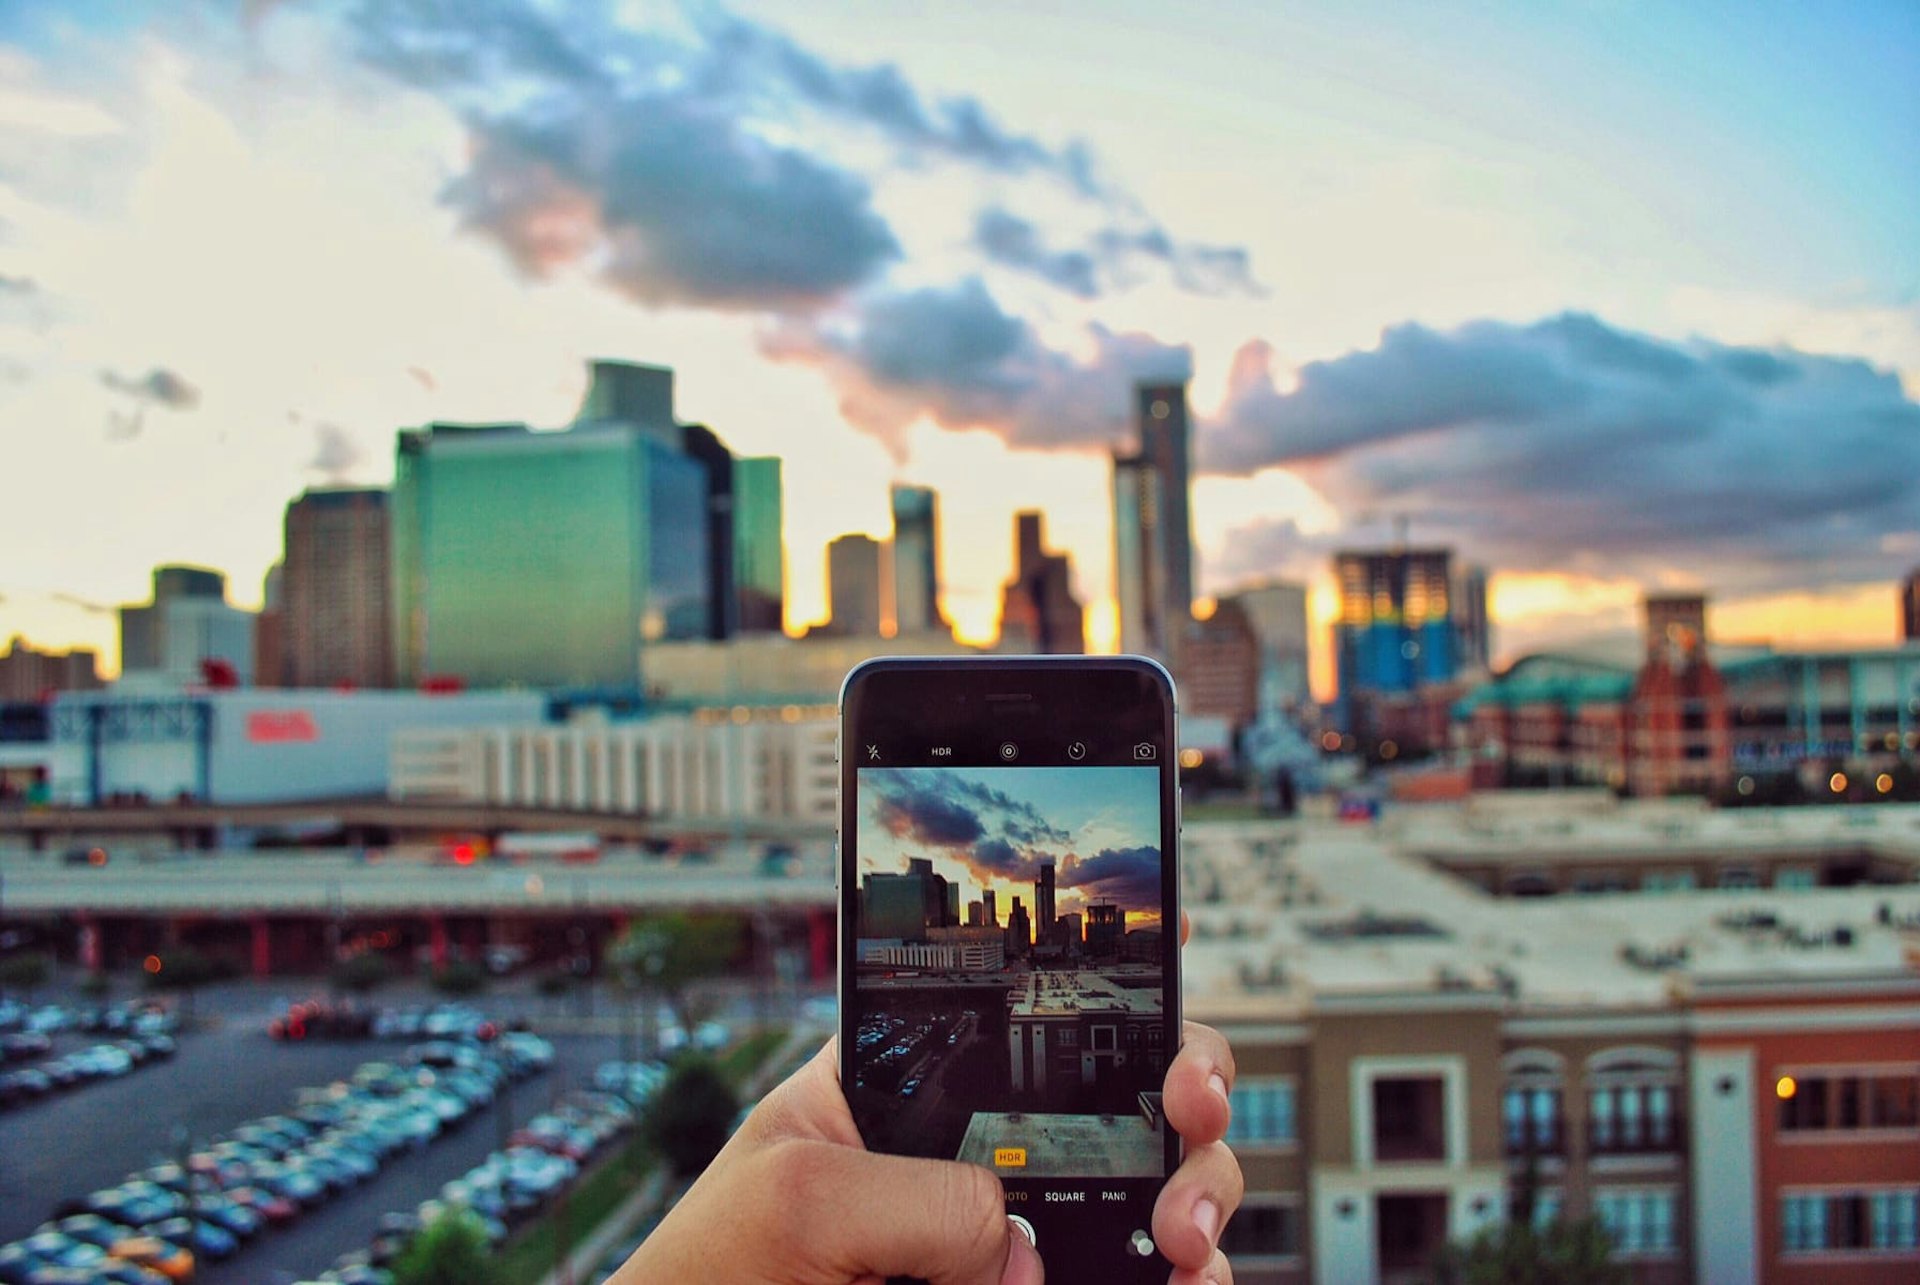 Person taking phone camera photo of skyline in Houston, Texas at sunset